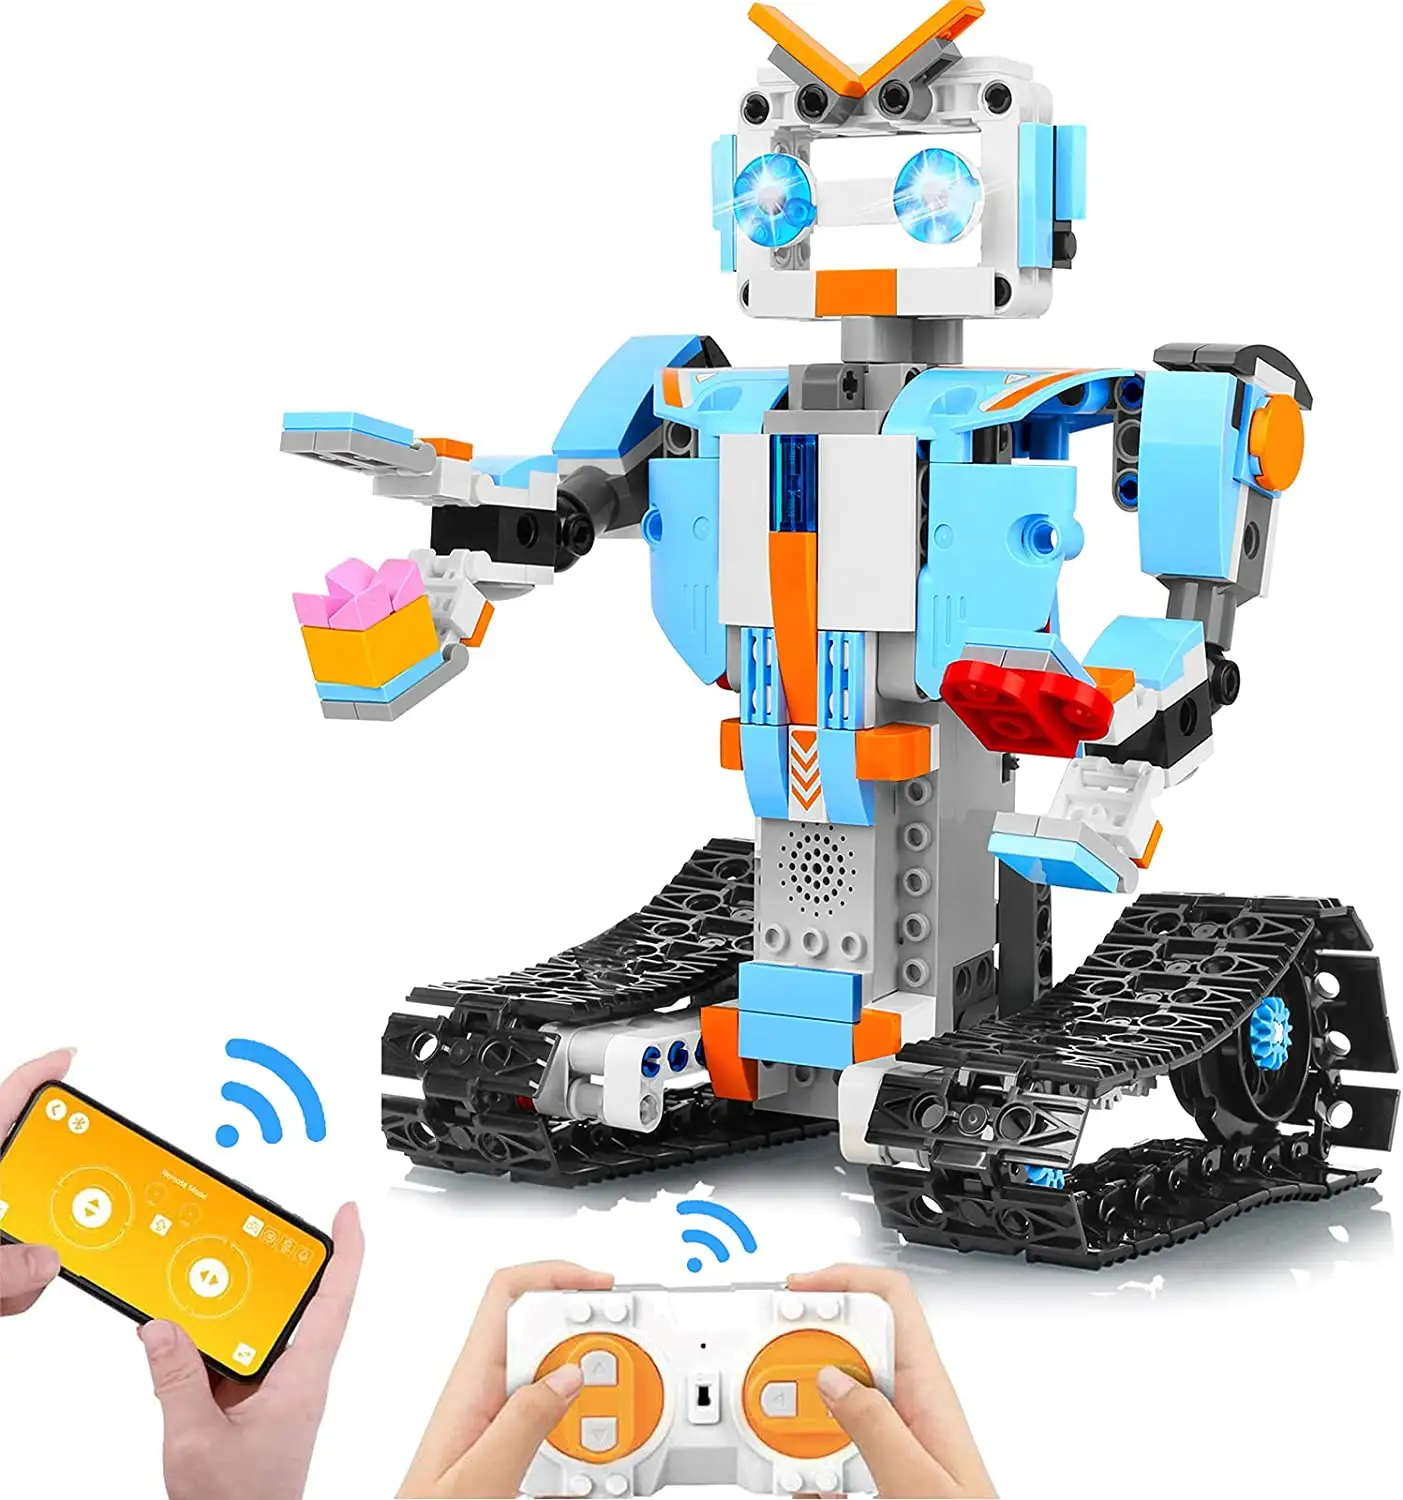 Building Block RC Robot Toys Kits , Remote & APP Control Robot Snap Together Engineering Kits STEM Building Toys For Kids